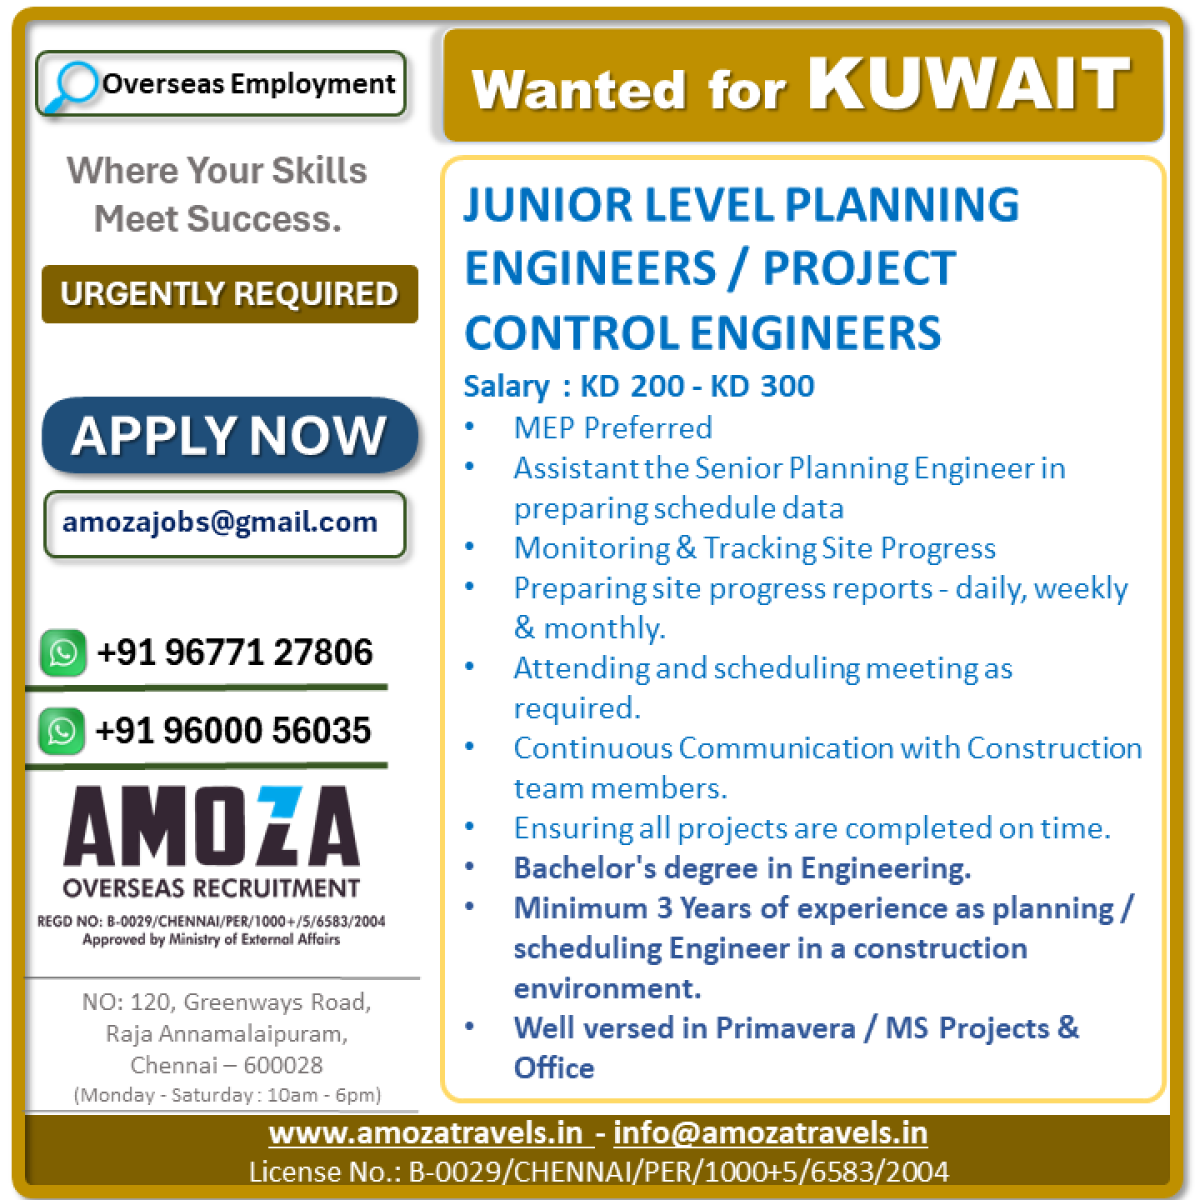 JUNIOR LEVEL PLANNING ENGINEERS / PROJECT CONTROL ENGINEERS